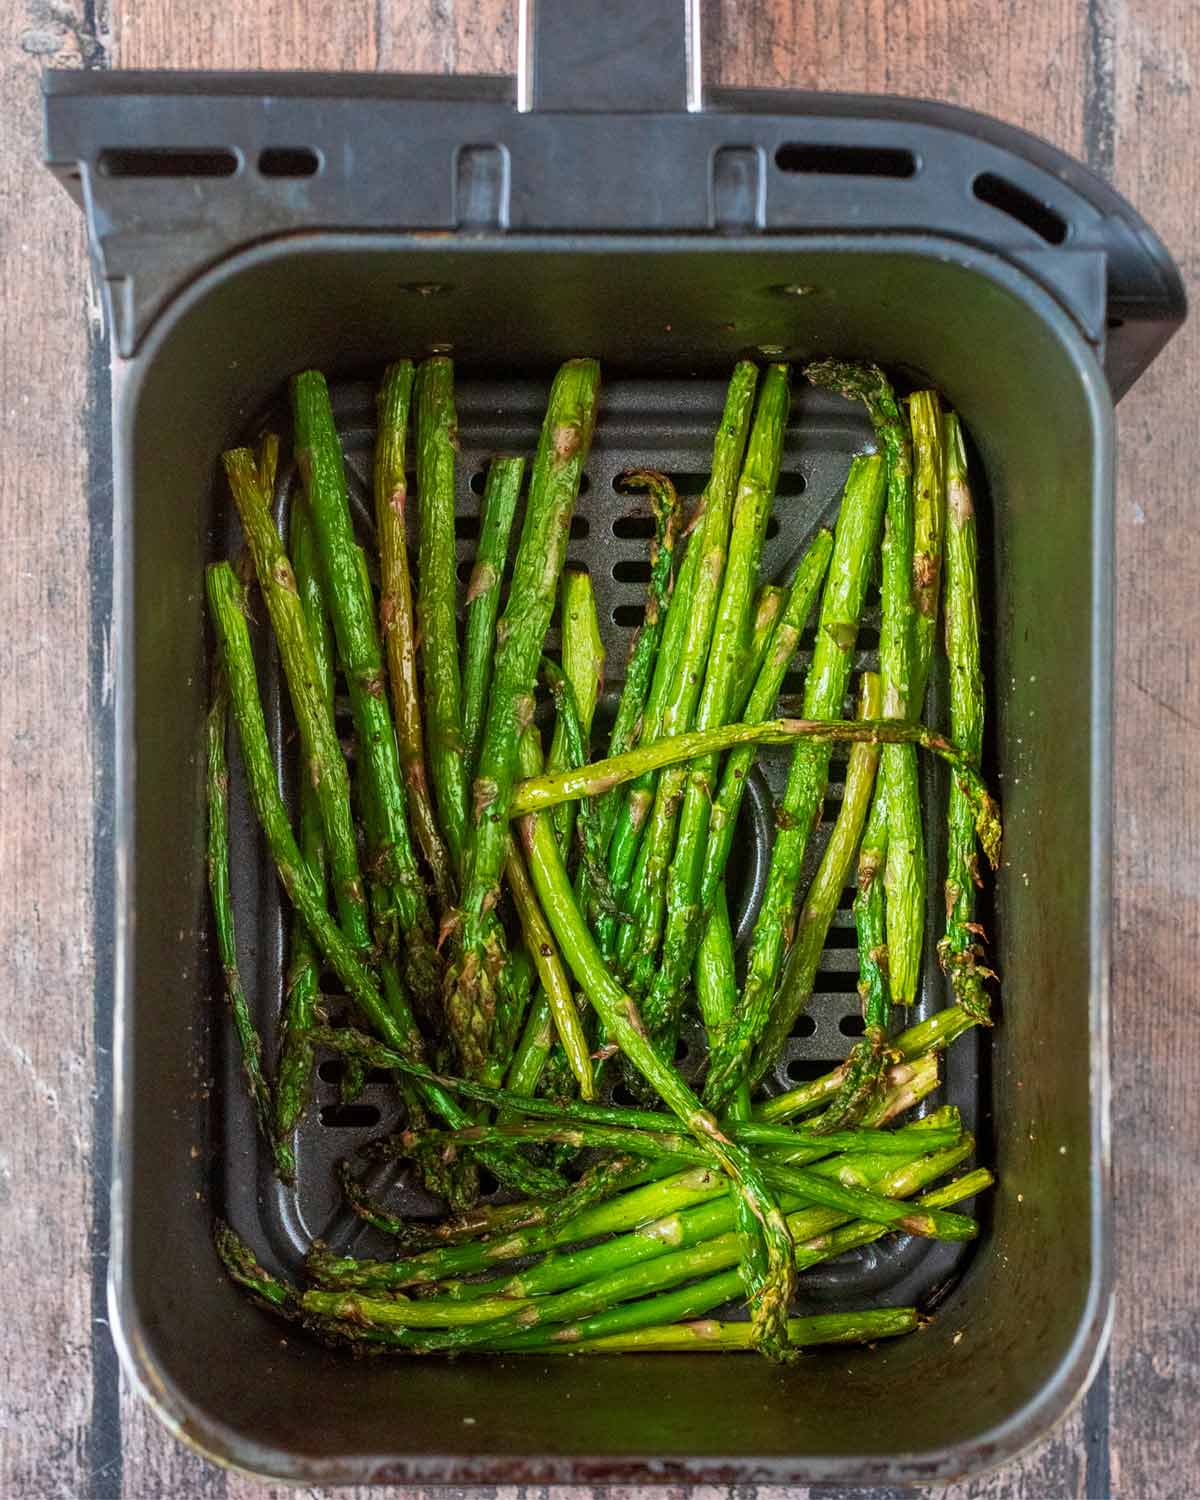 Cooked asparagus spears in an air fryer basket.